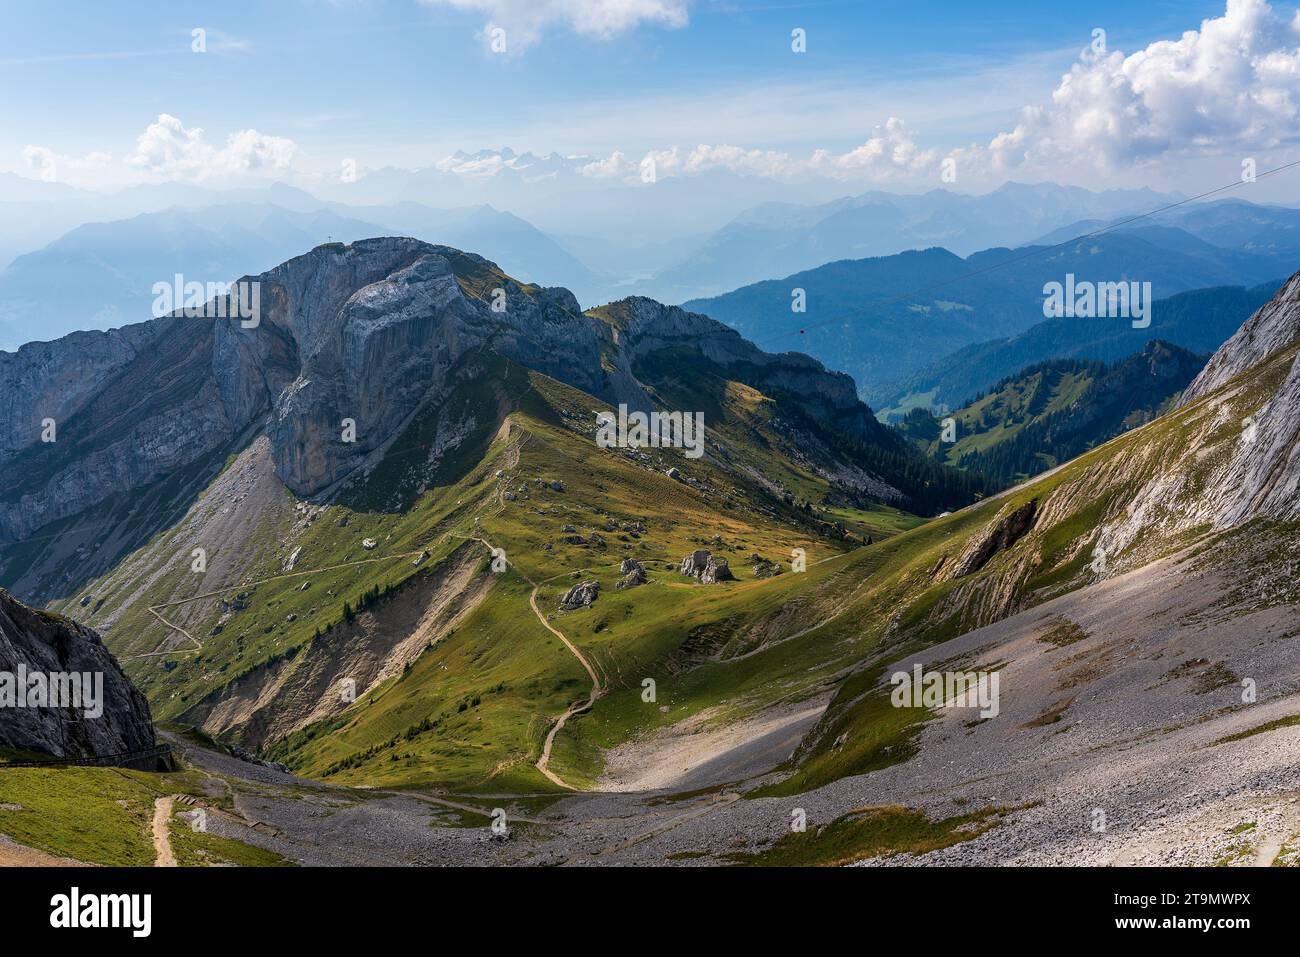 Panoramic view of Swiss mountains and Lake Lucerne. Stock Photo